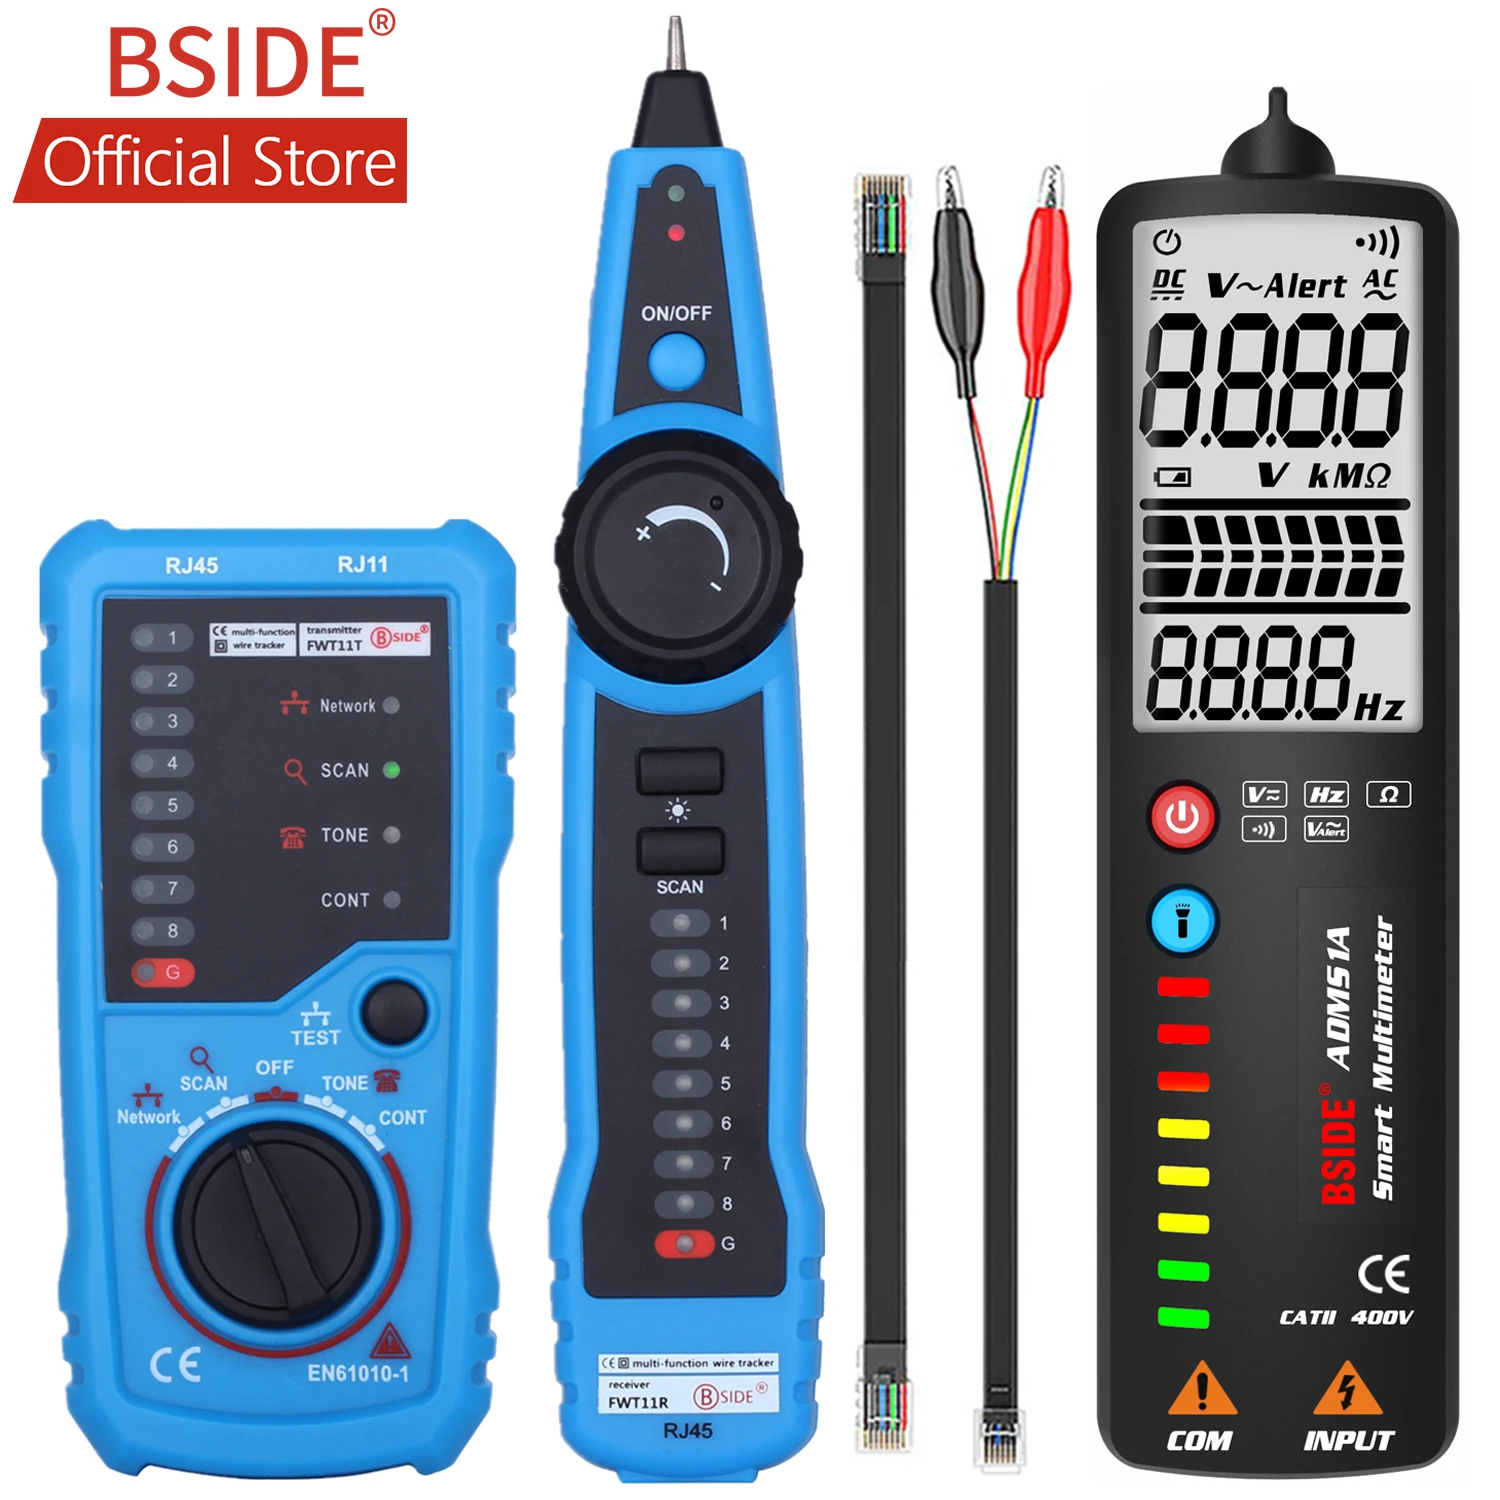 1 micrometer BSIDE FWT11 High Quality RJ11 RJ45 Cat5 Cat6 Telephone Wire Tracker Tracer Toner Ethernet LAN Network Cable tester Line Finder water submeter Measurement & Analysis Tools